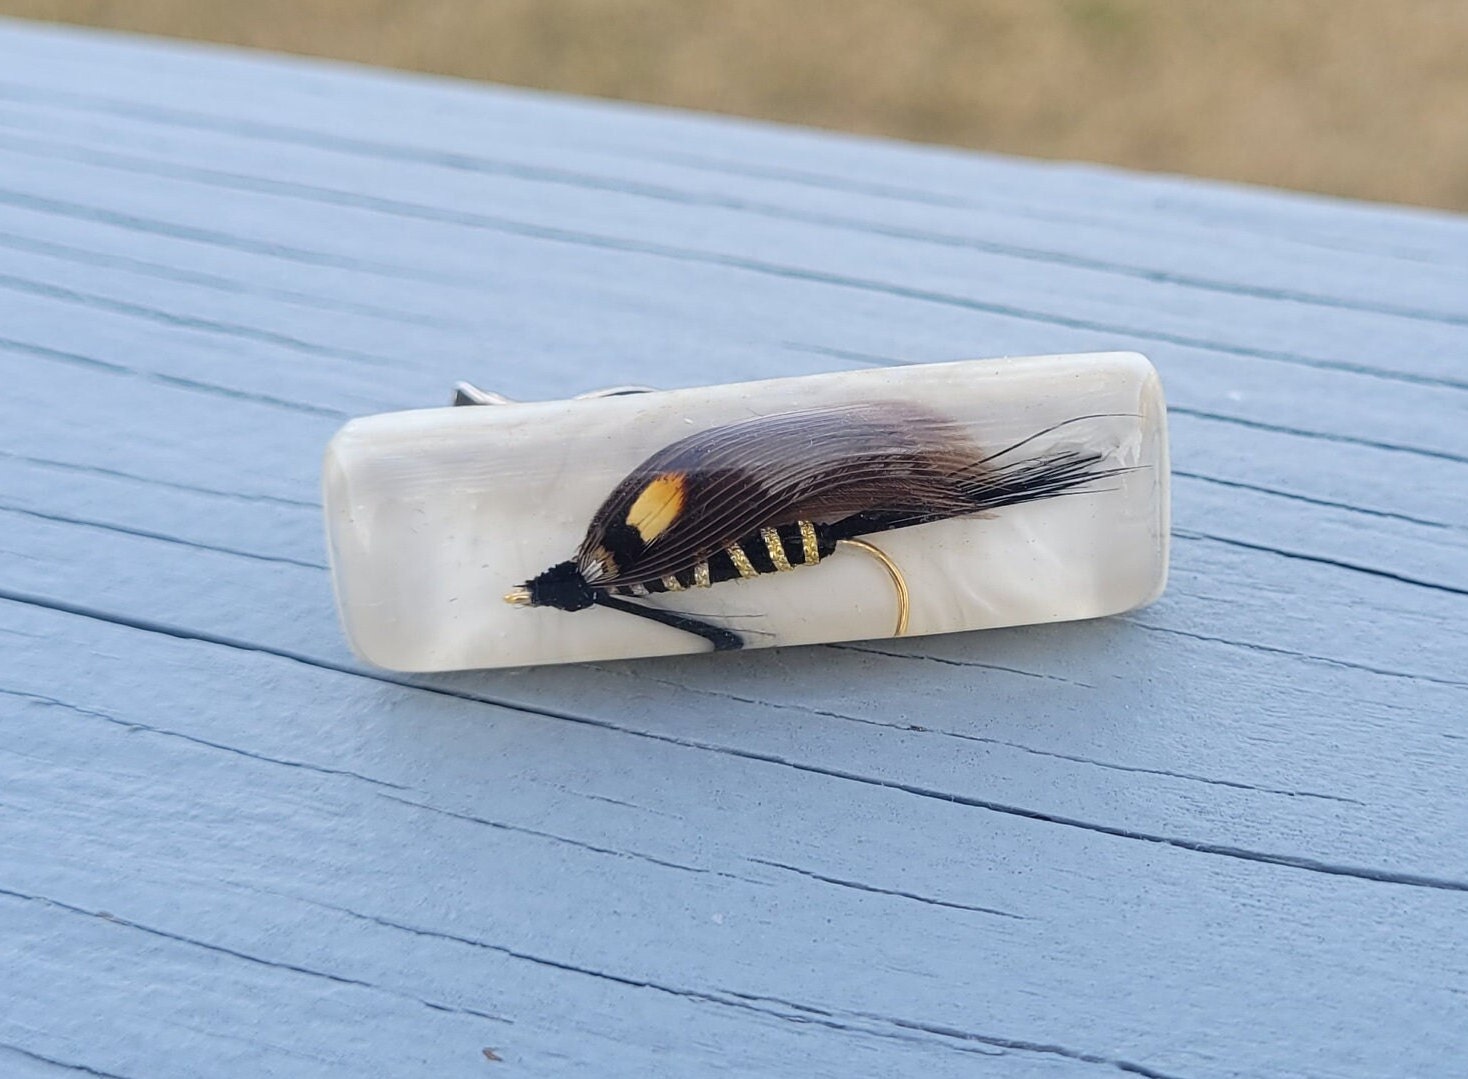 Vintage Fly Fishing Tie Clip. Gift for Dad, Groom, Groomsmen, Wedding, Anniversary, Wedding, Christmas, Birthday, Father's Day.